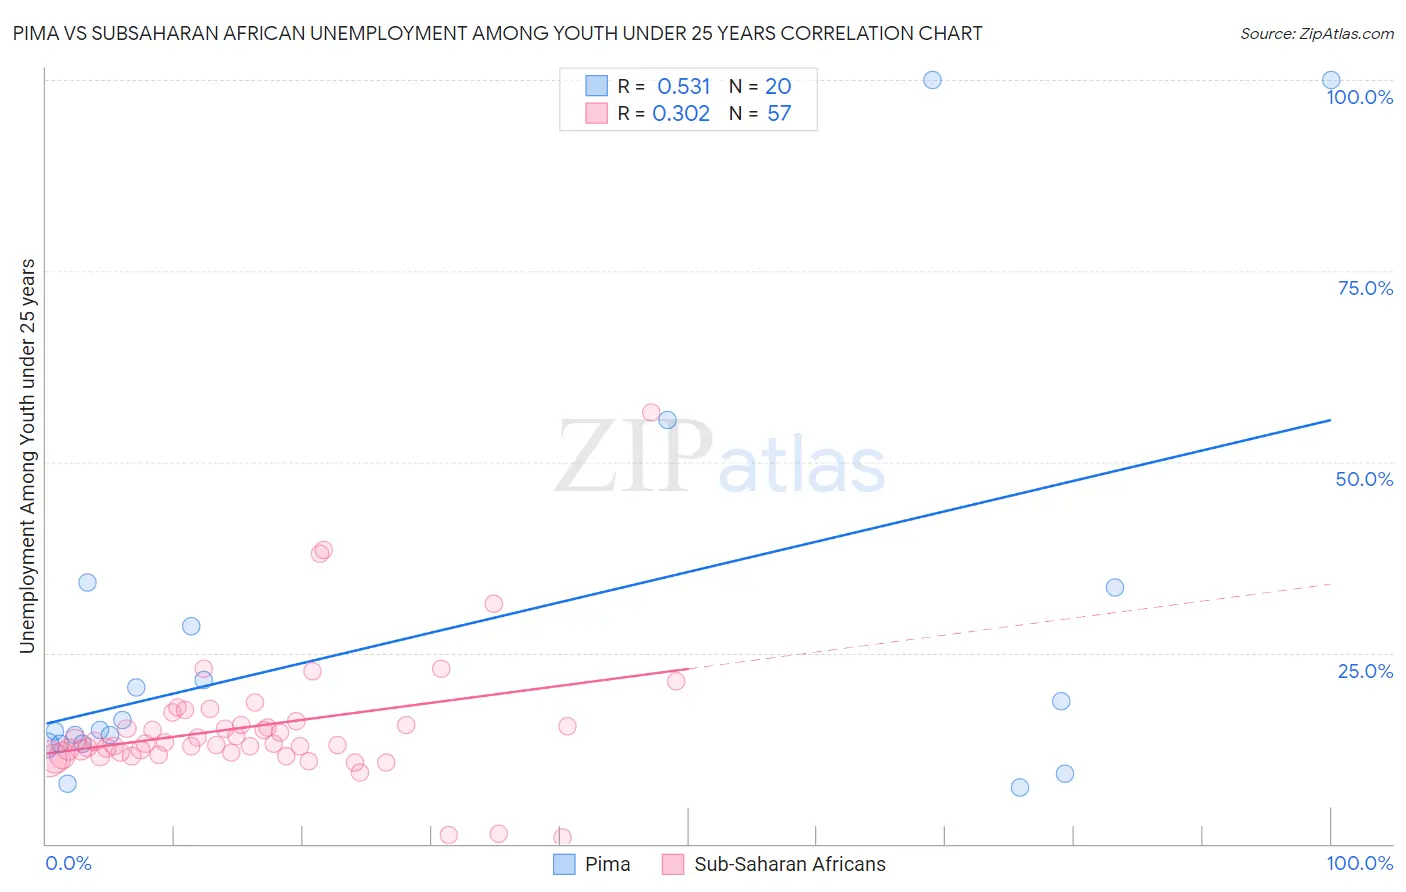 Pima vs Subsaharan African Unemployment Among Youth under 25 years